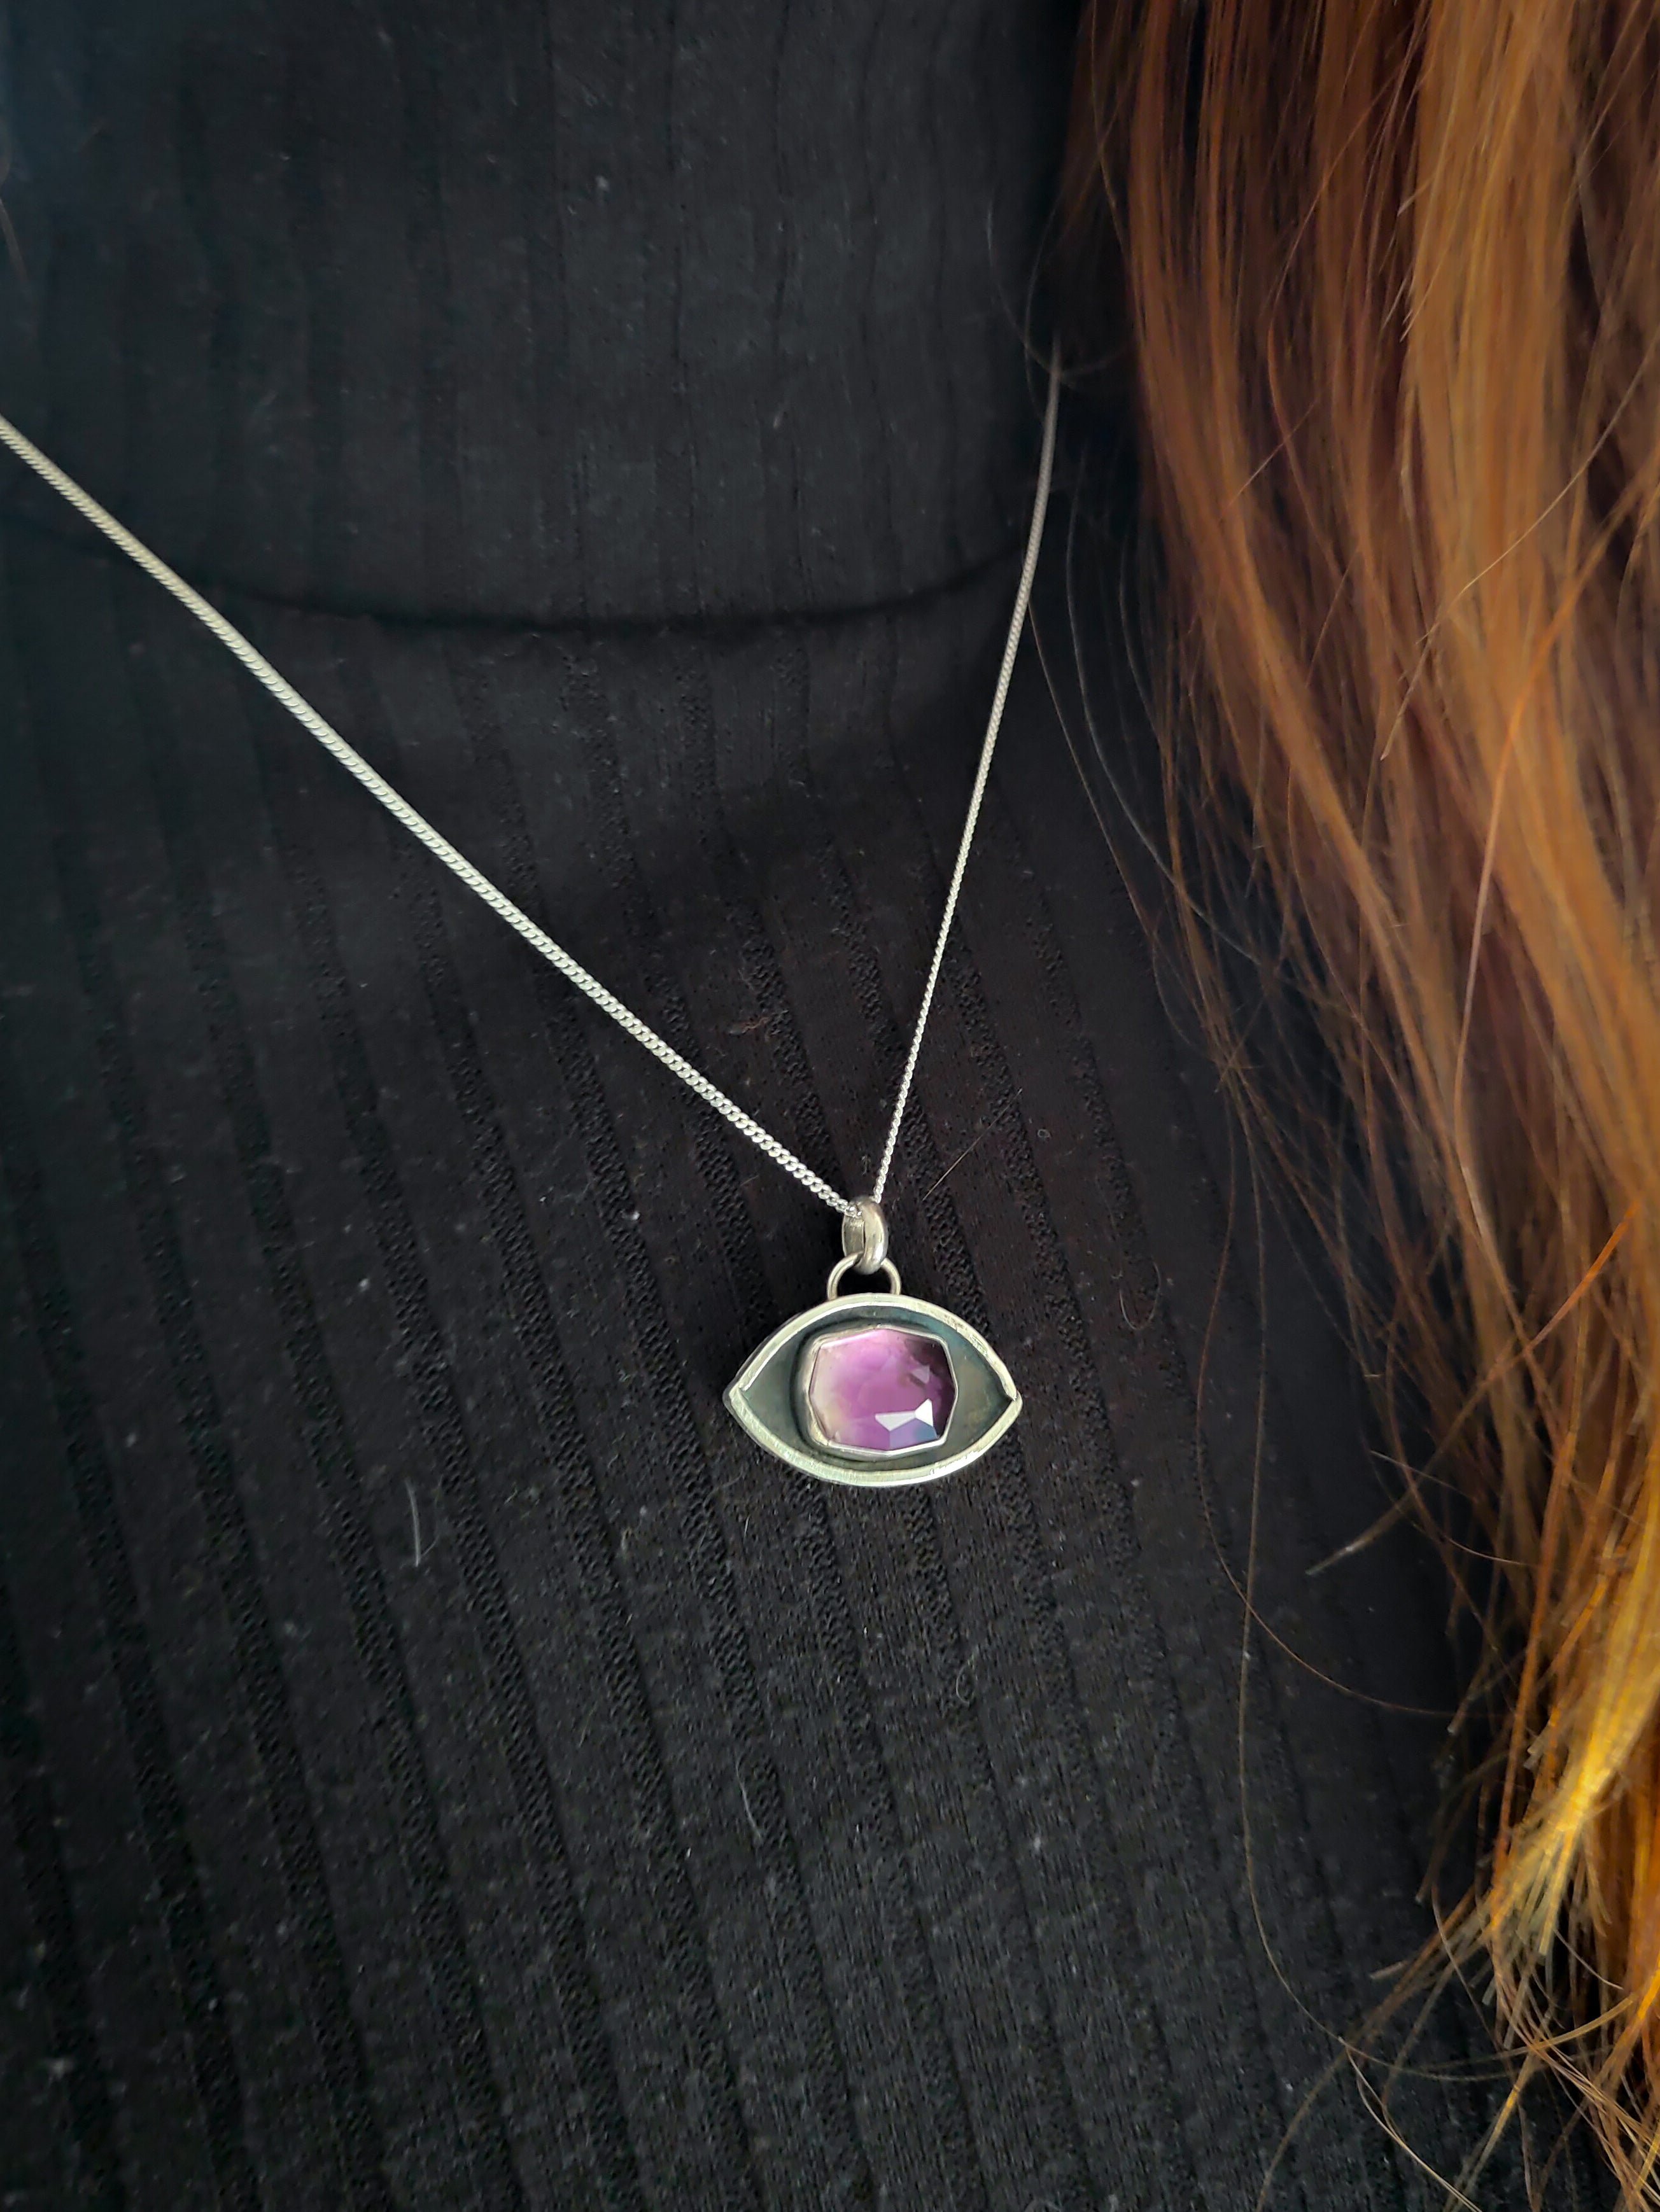 Third Eye - Eye necklace in faceted amethyst and silver, moons and stars on the back